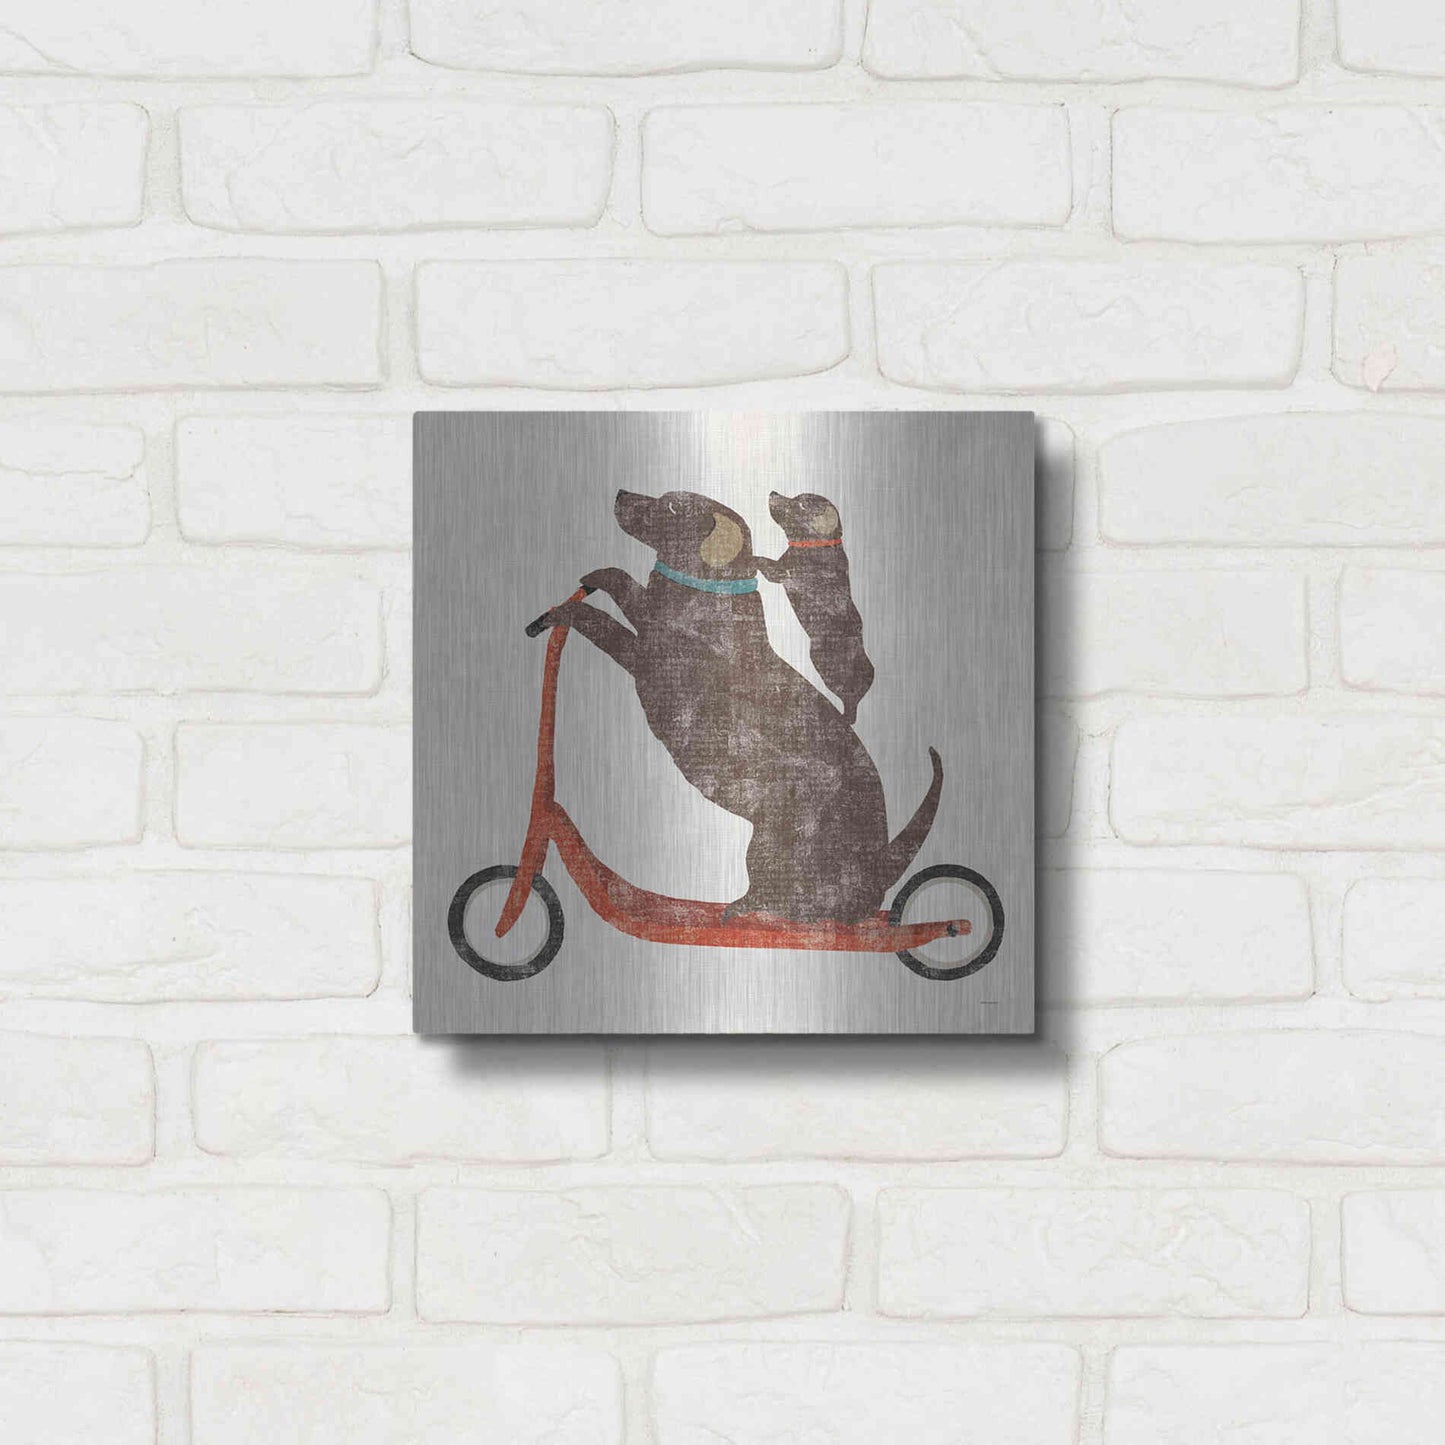 Luxe Metal Art 'Lab Scooter Ride' by Sue Schlabach, Metal Wall Art,12x12